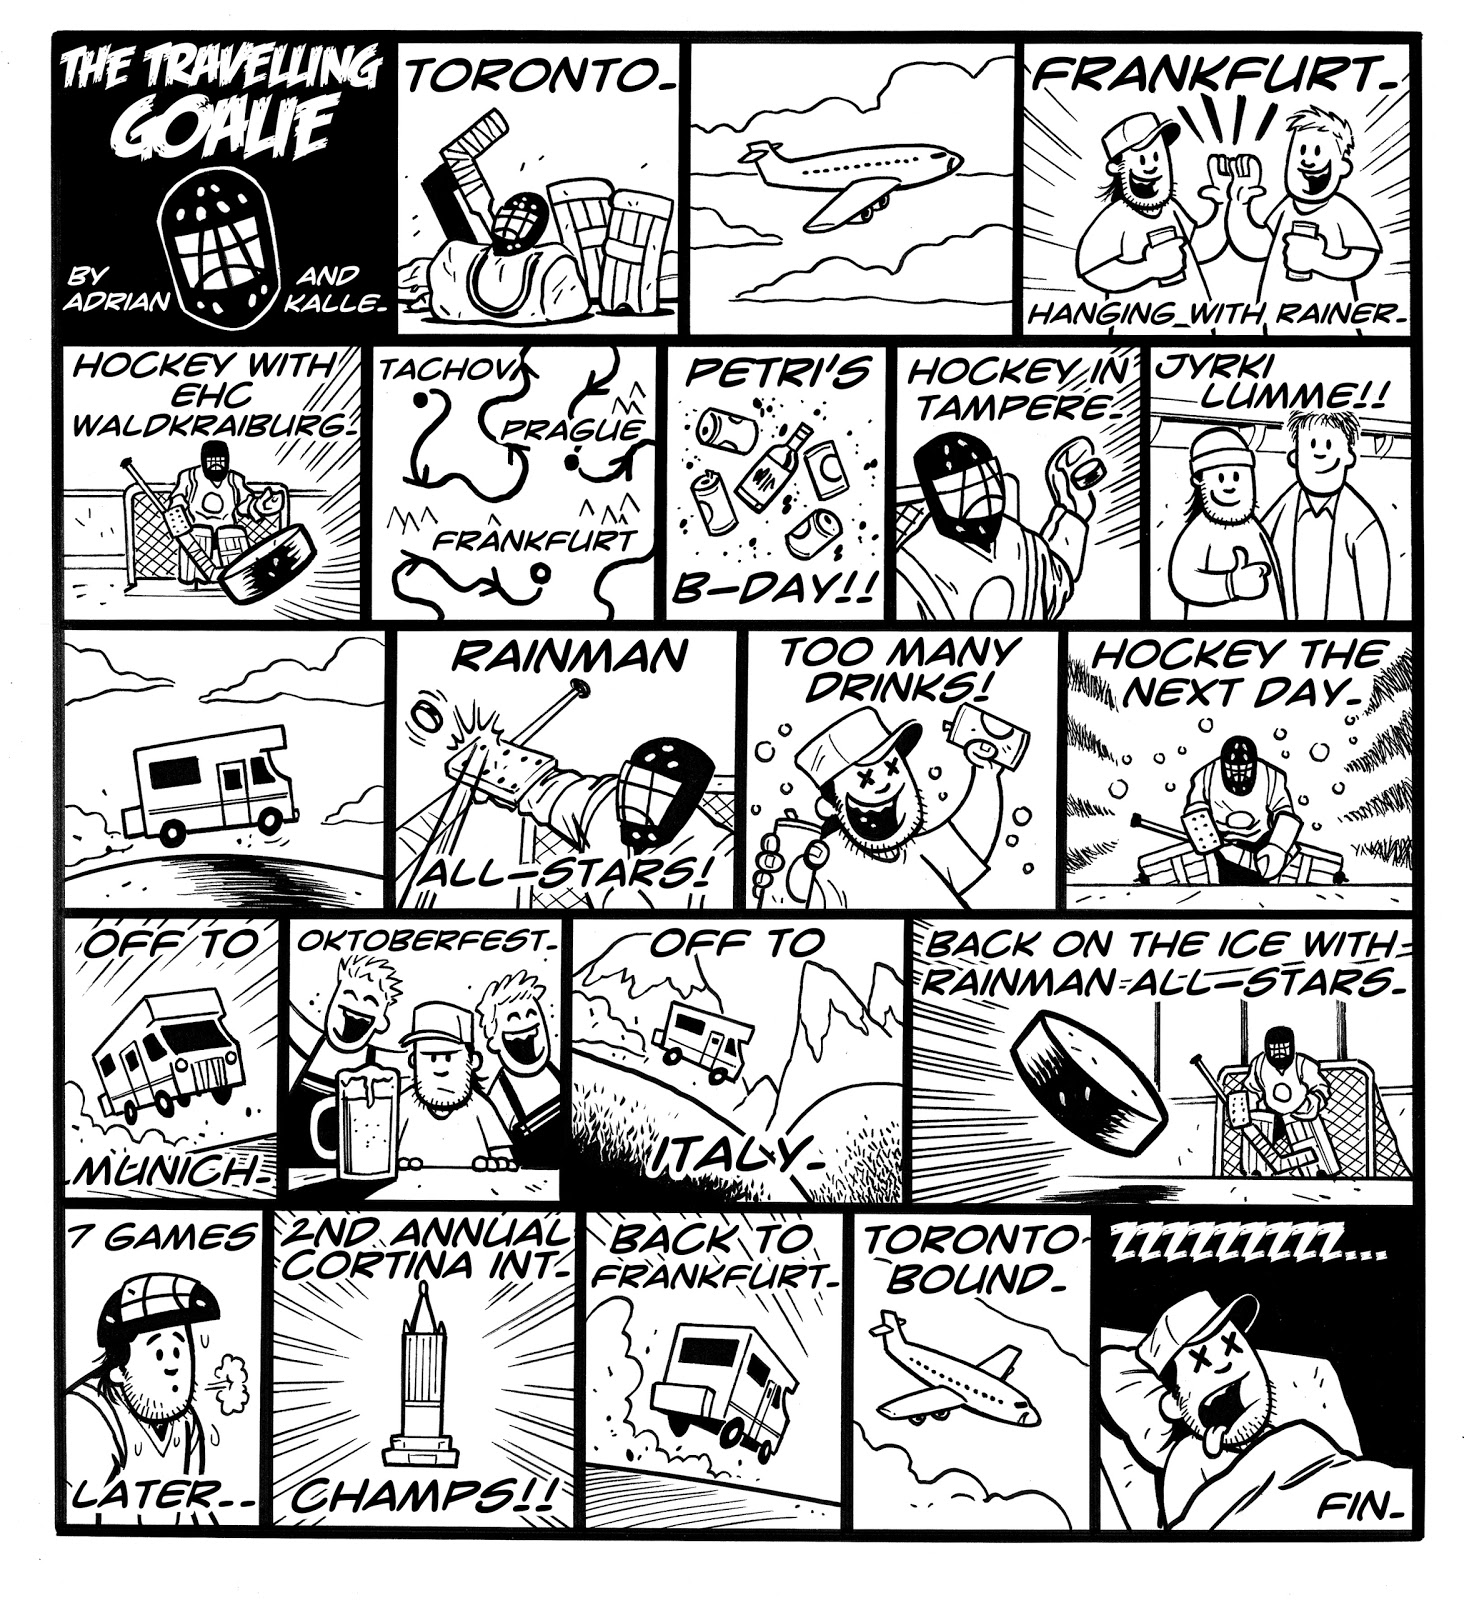 The Travelling Goalie: The Comic Strip